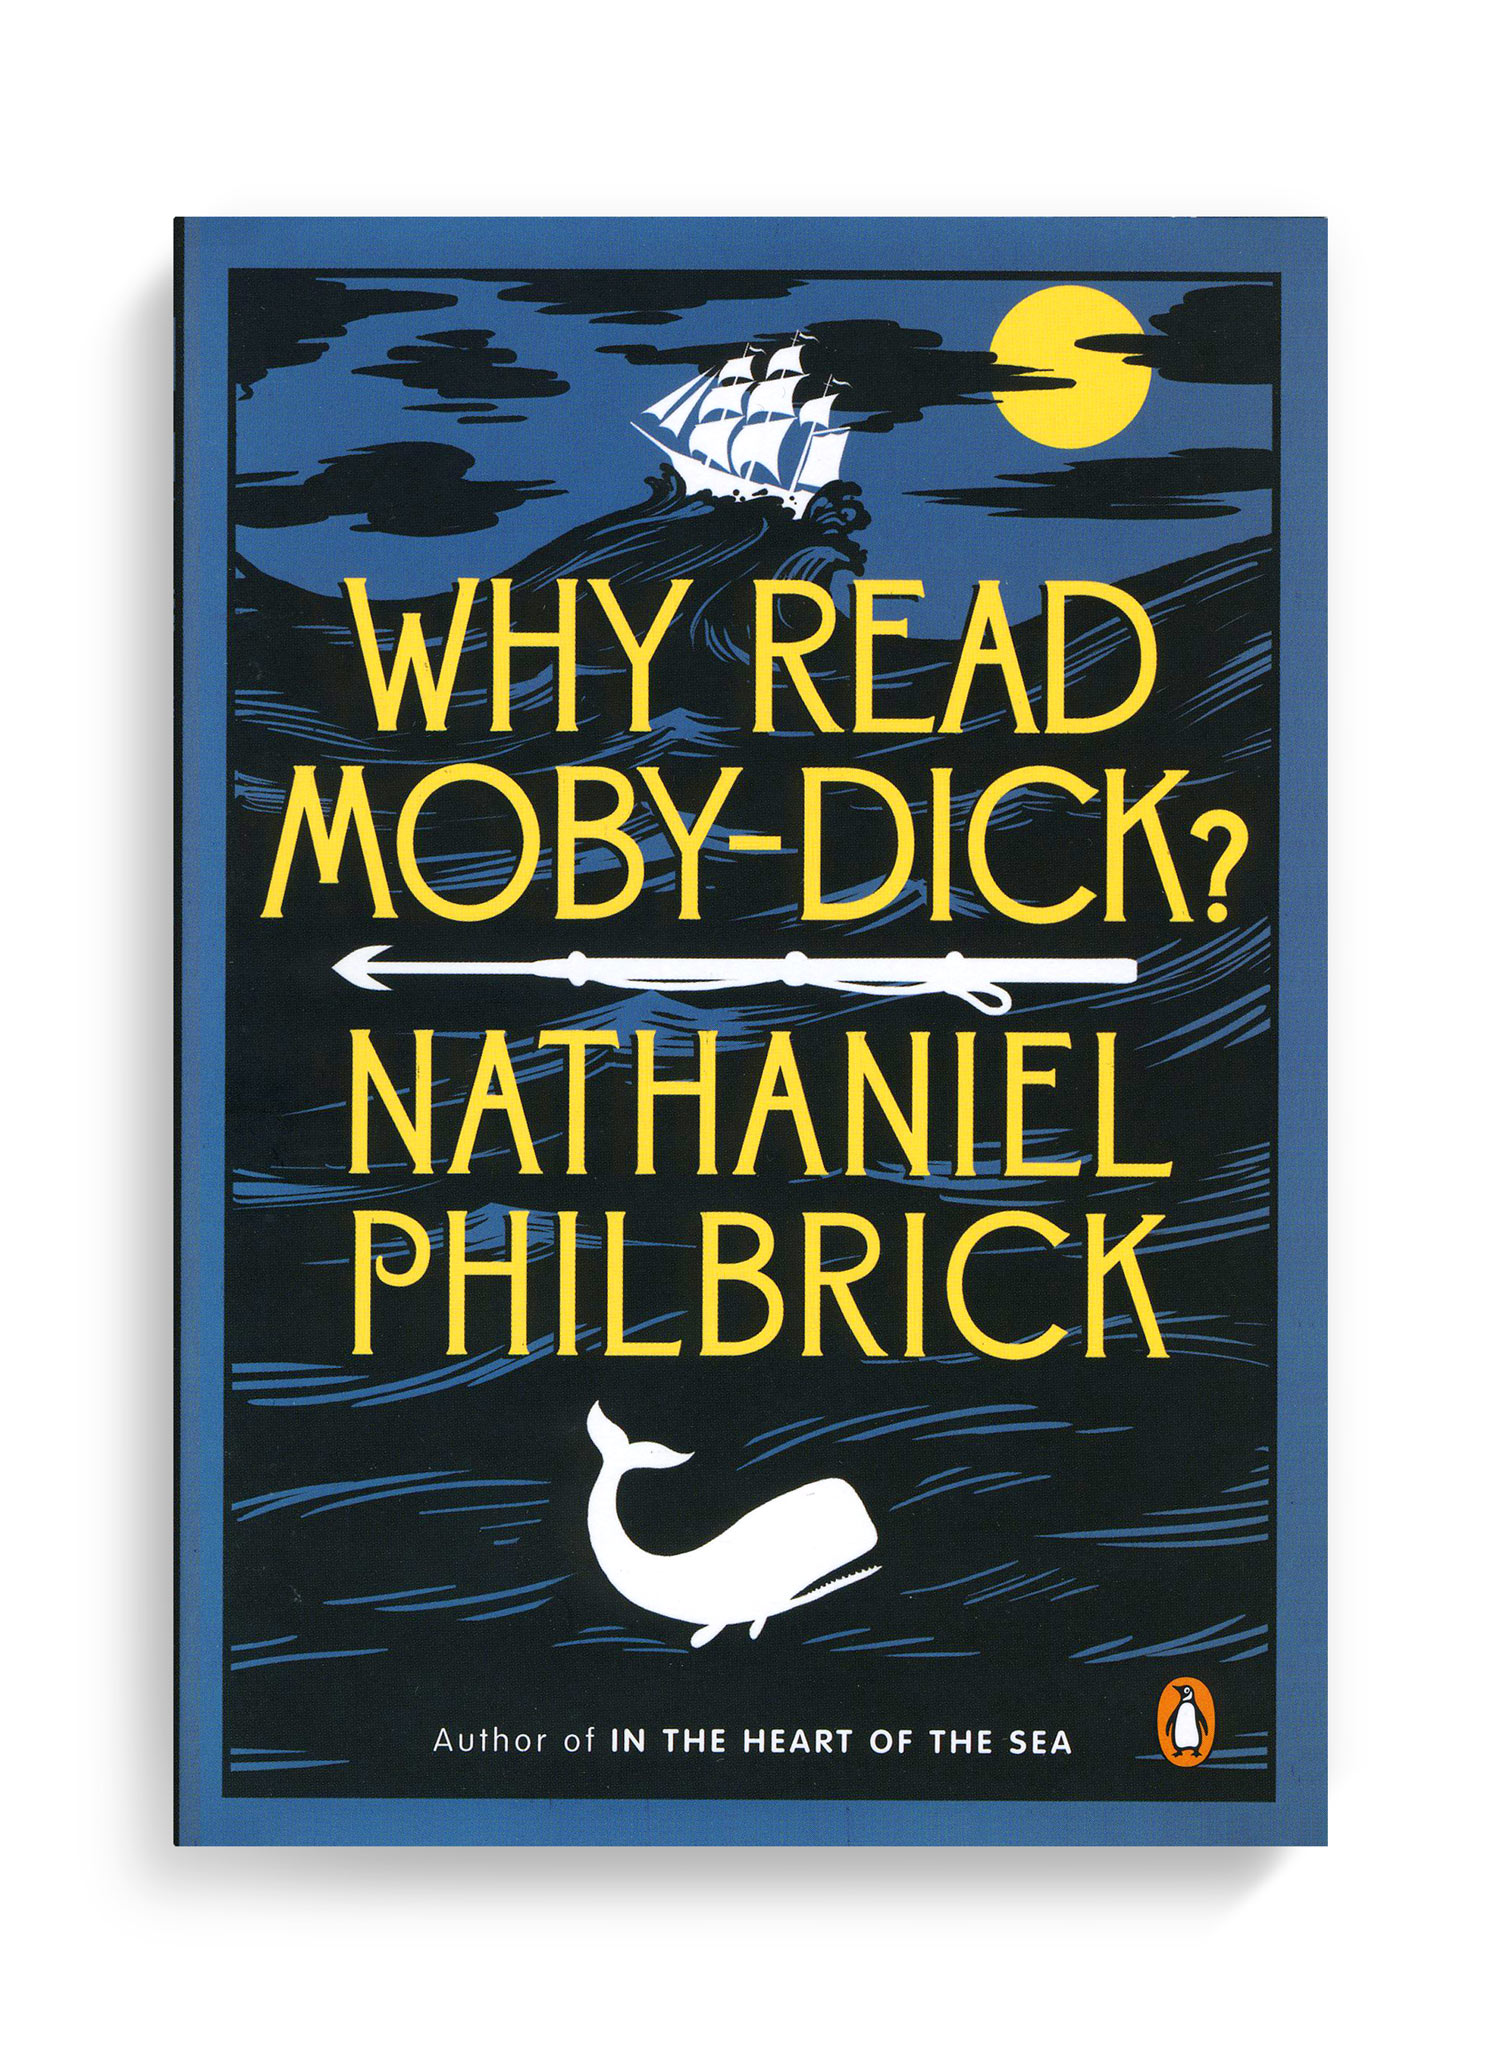 Why was moby dick significant